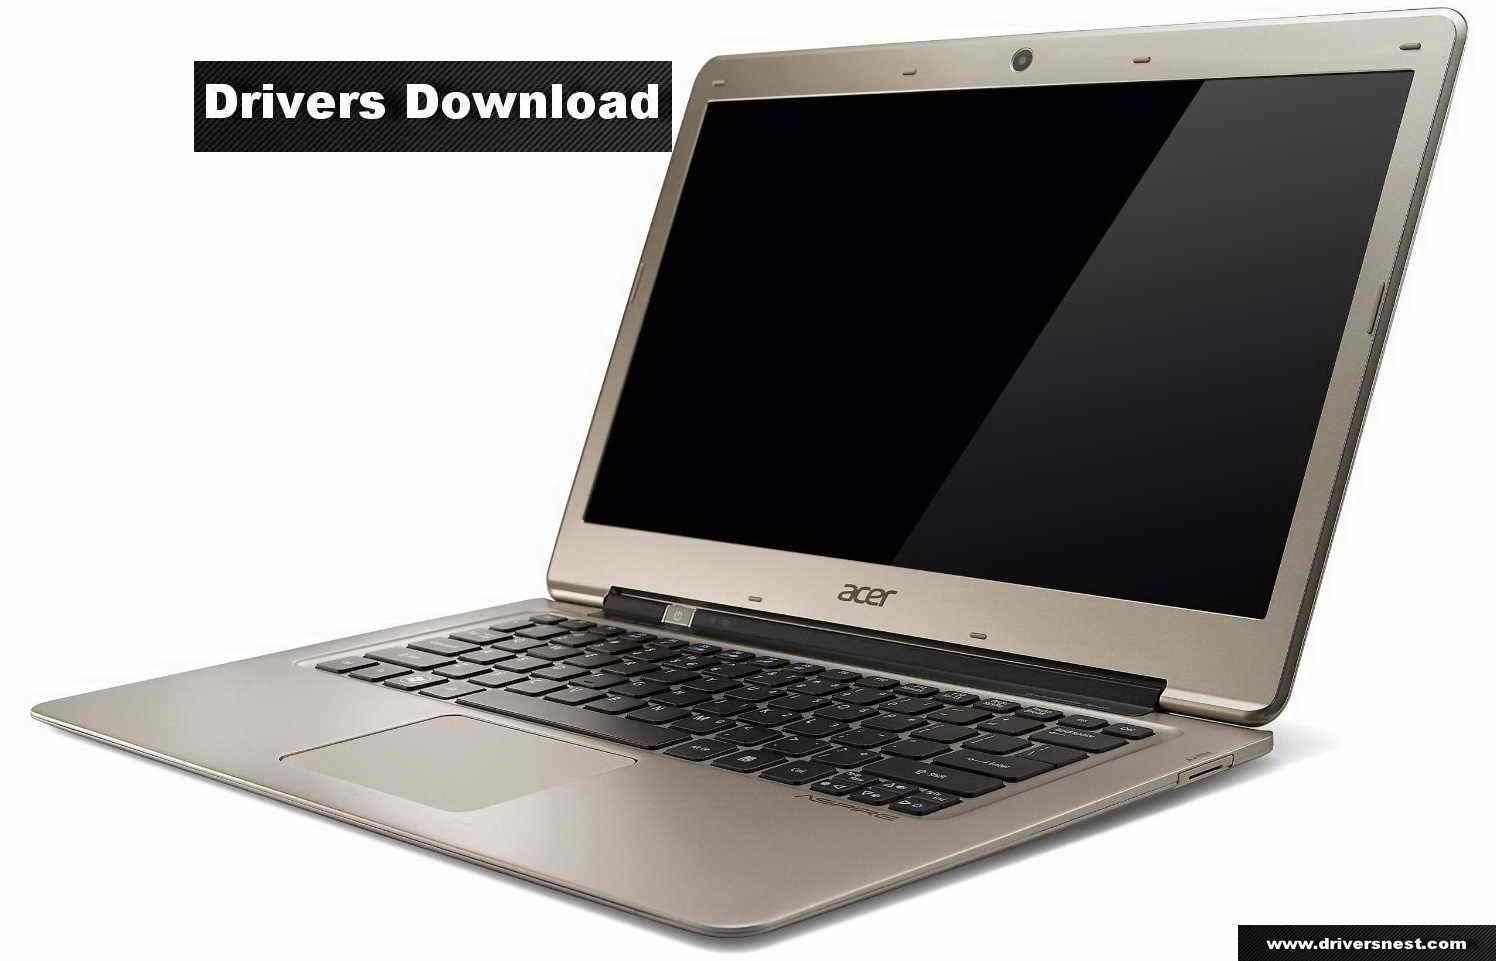 Acer aspire drivers free download